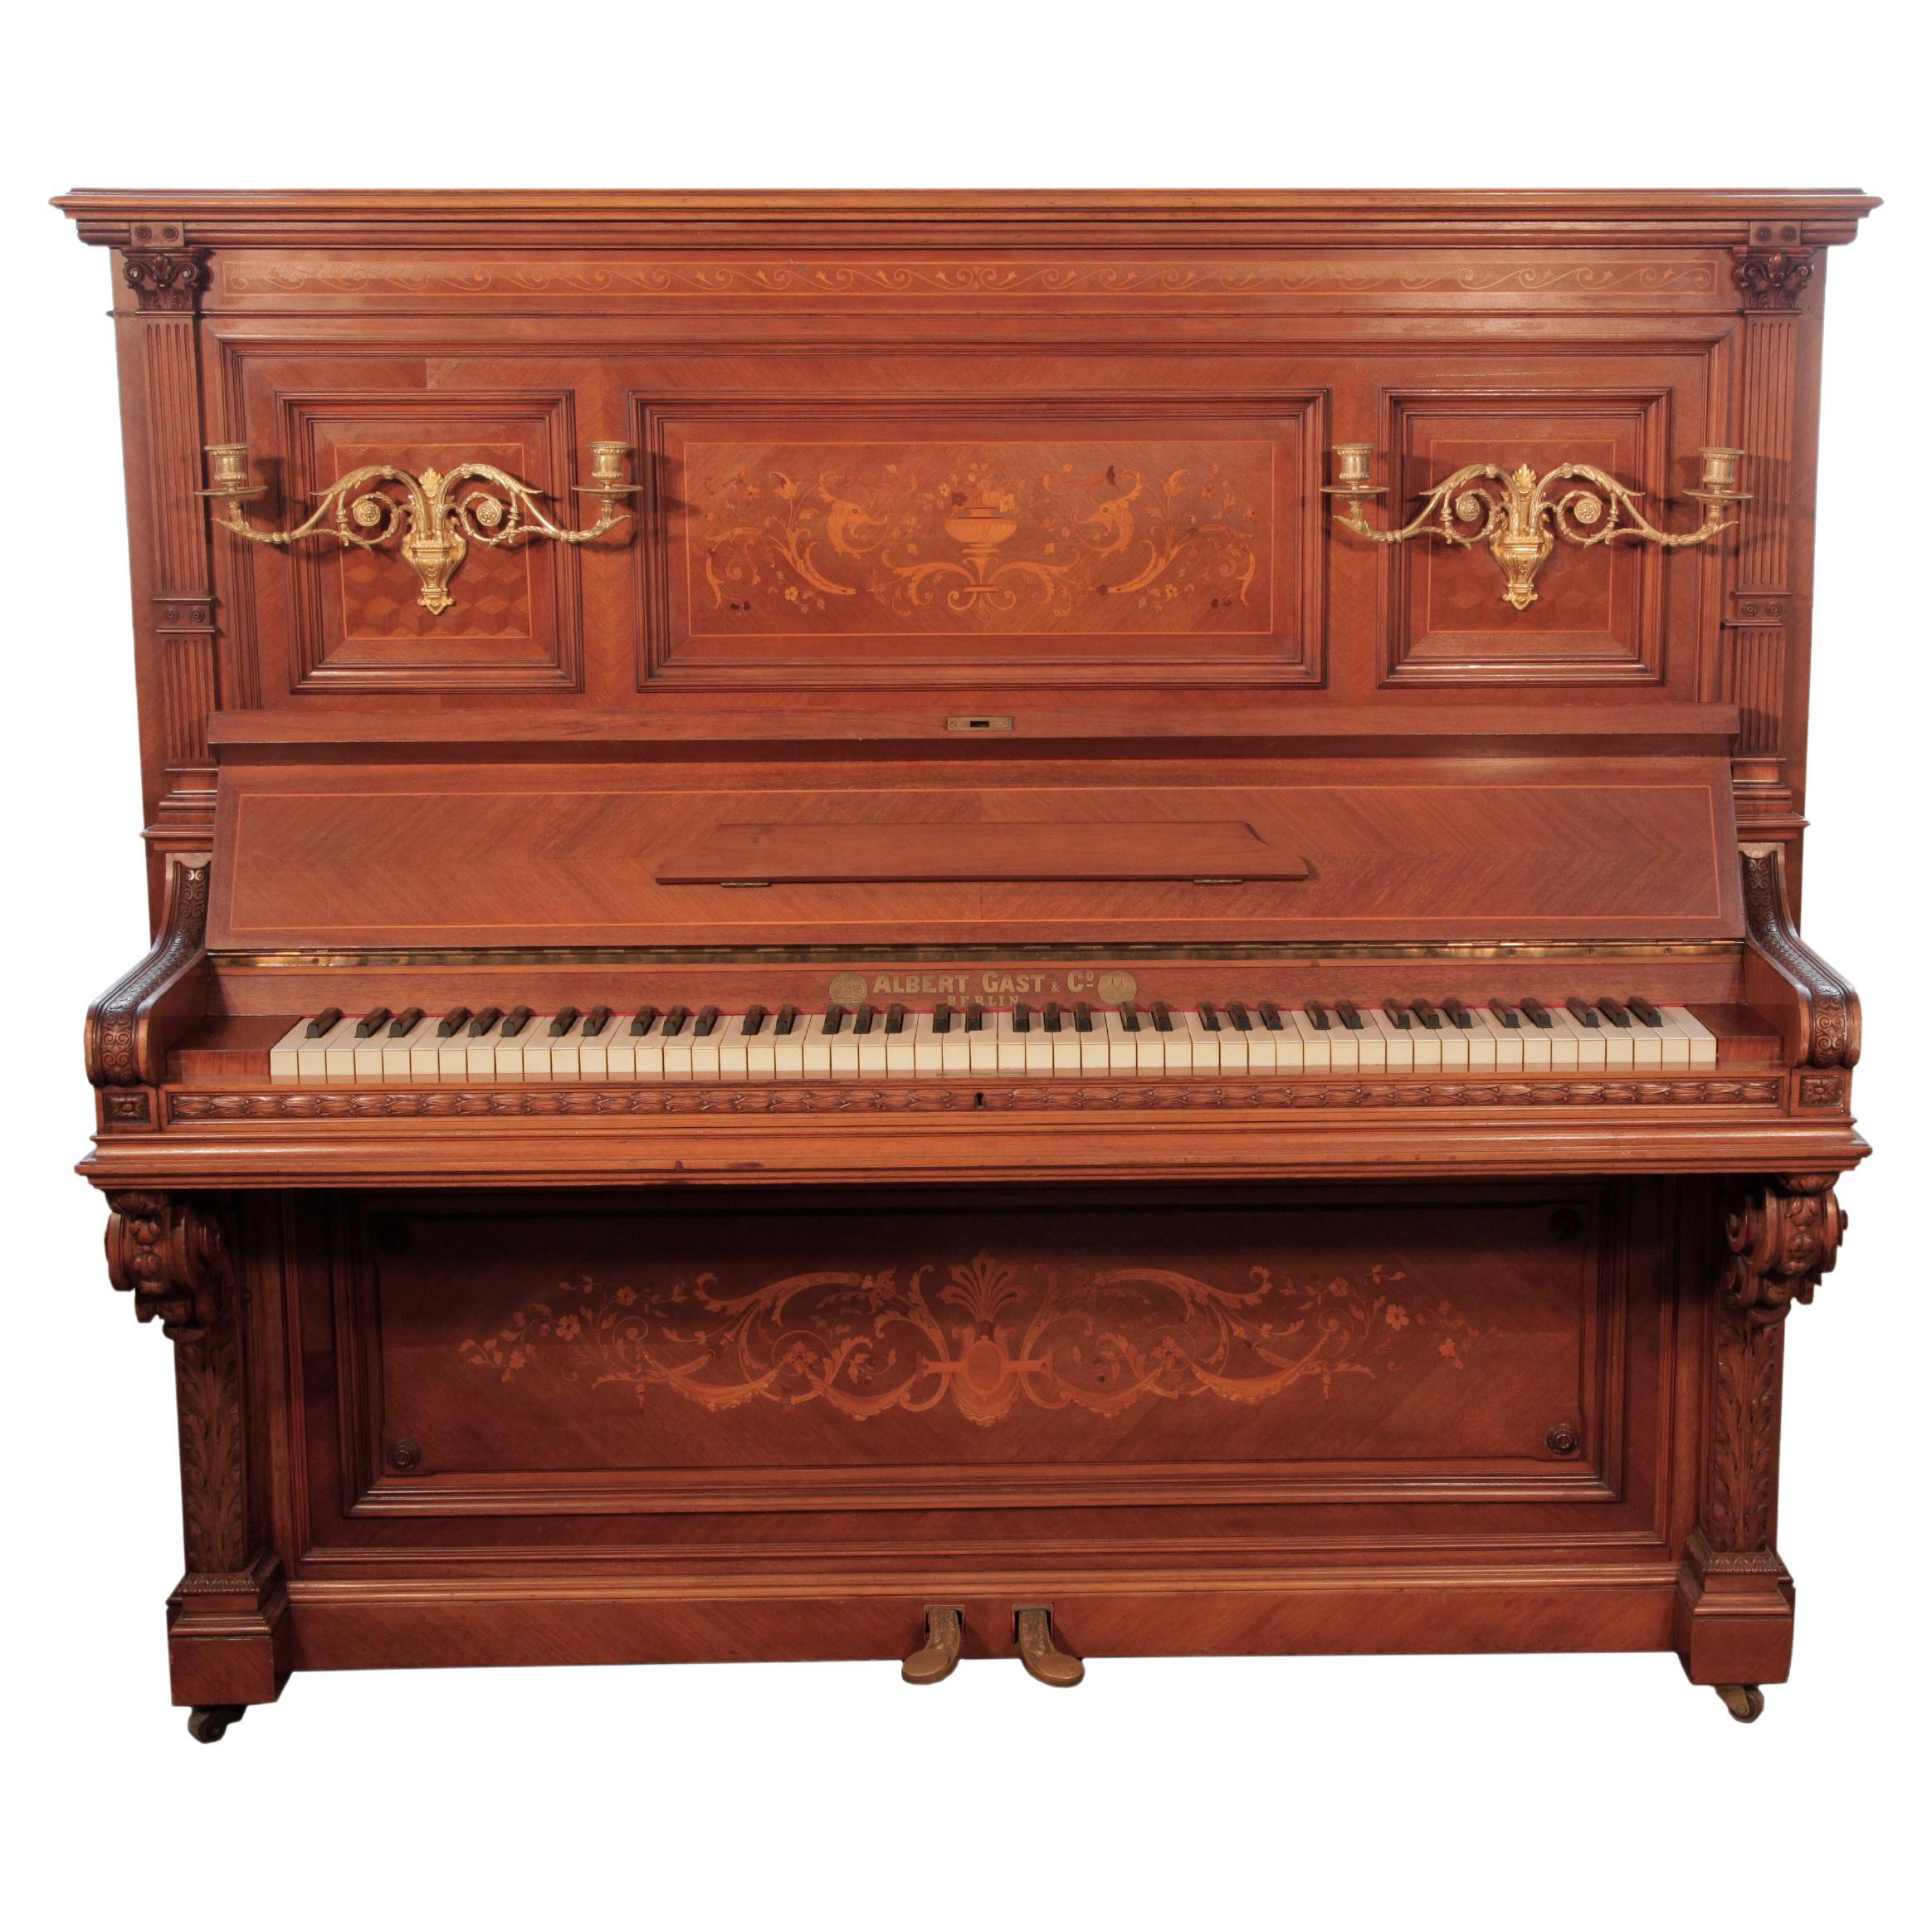 Gast Upright Piano Quartered Walnut Neoclassical Inlay Brass Candlesks en vente